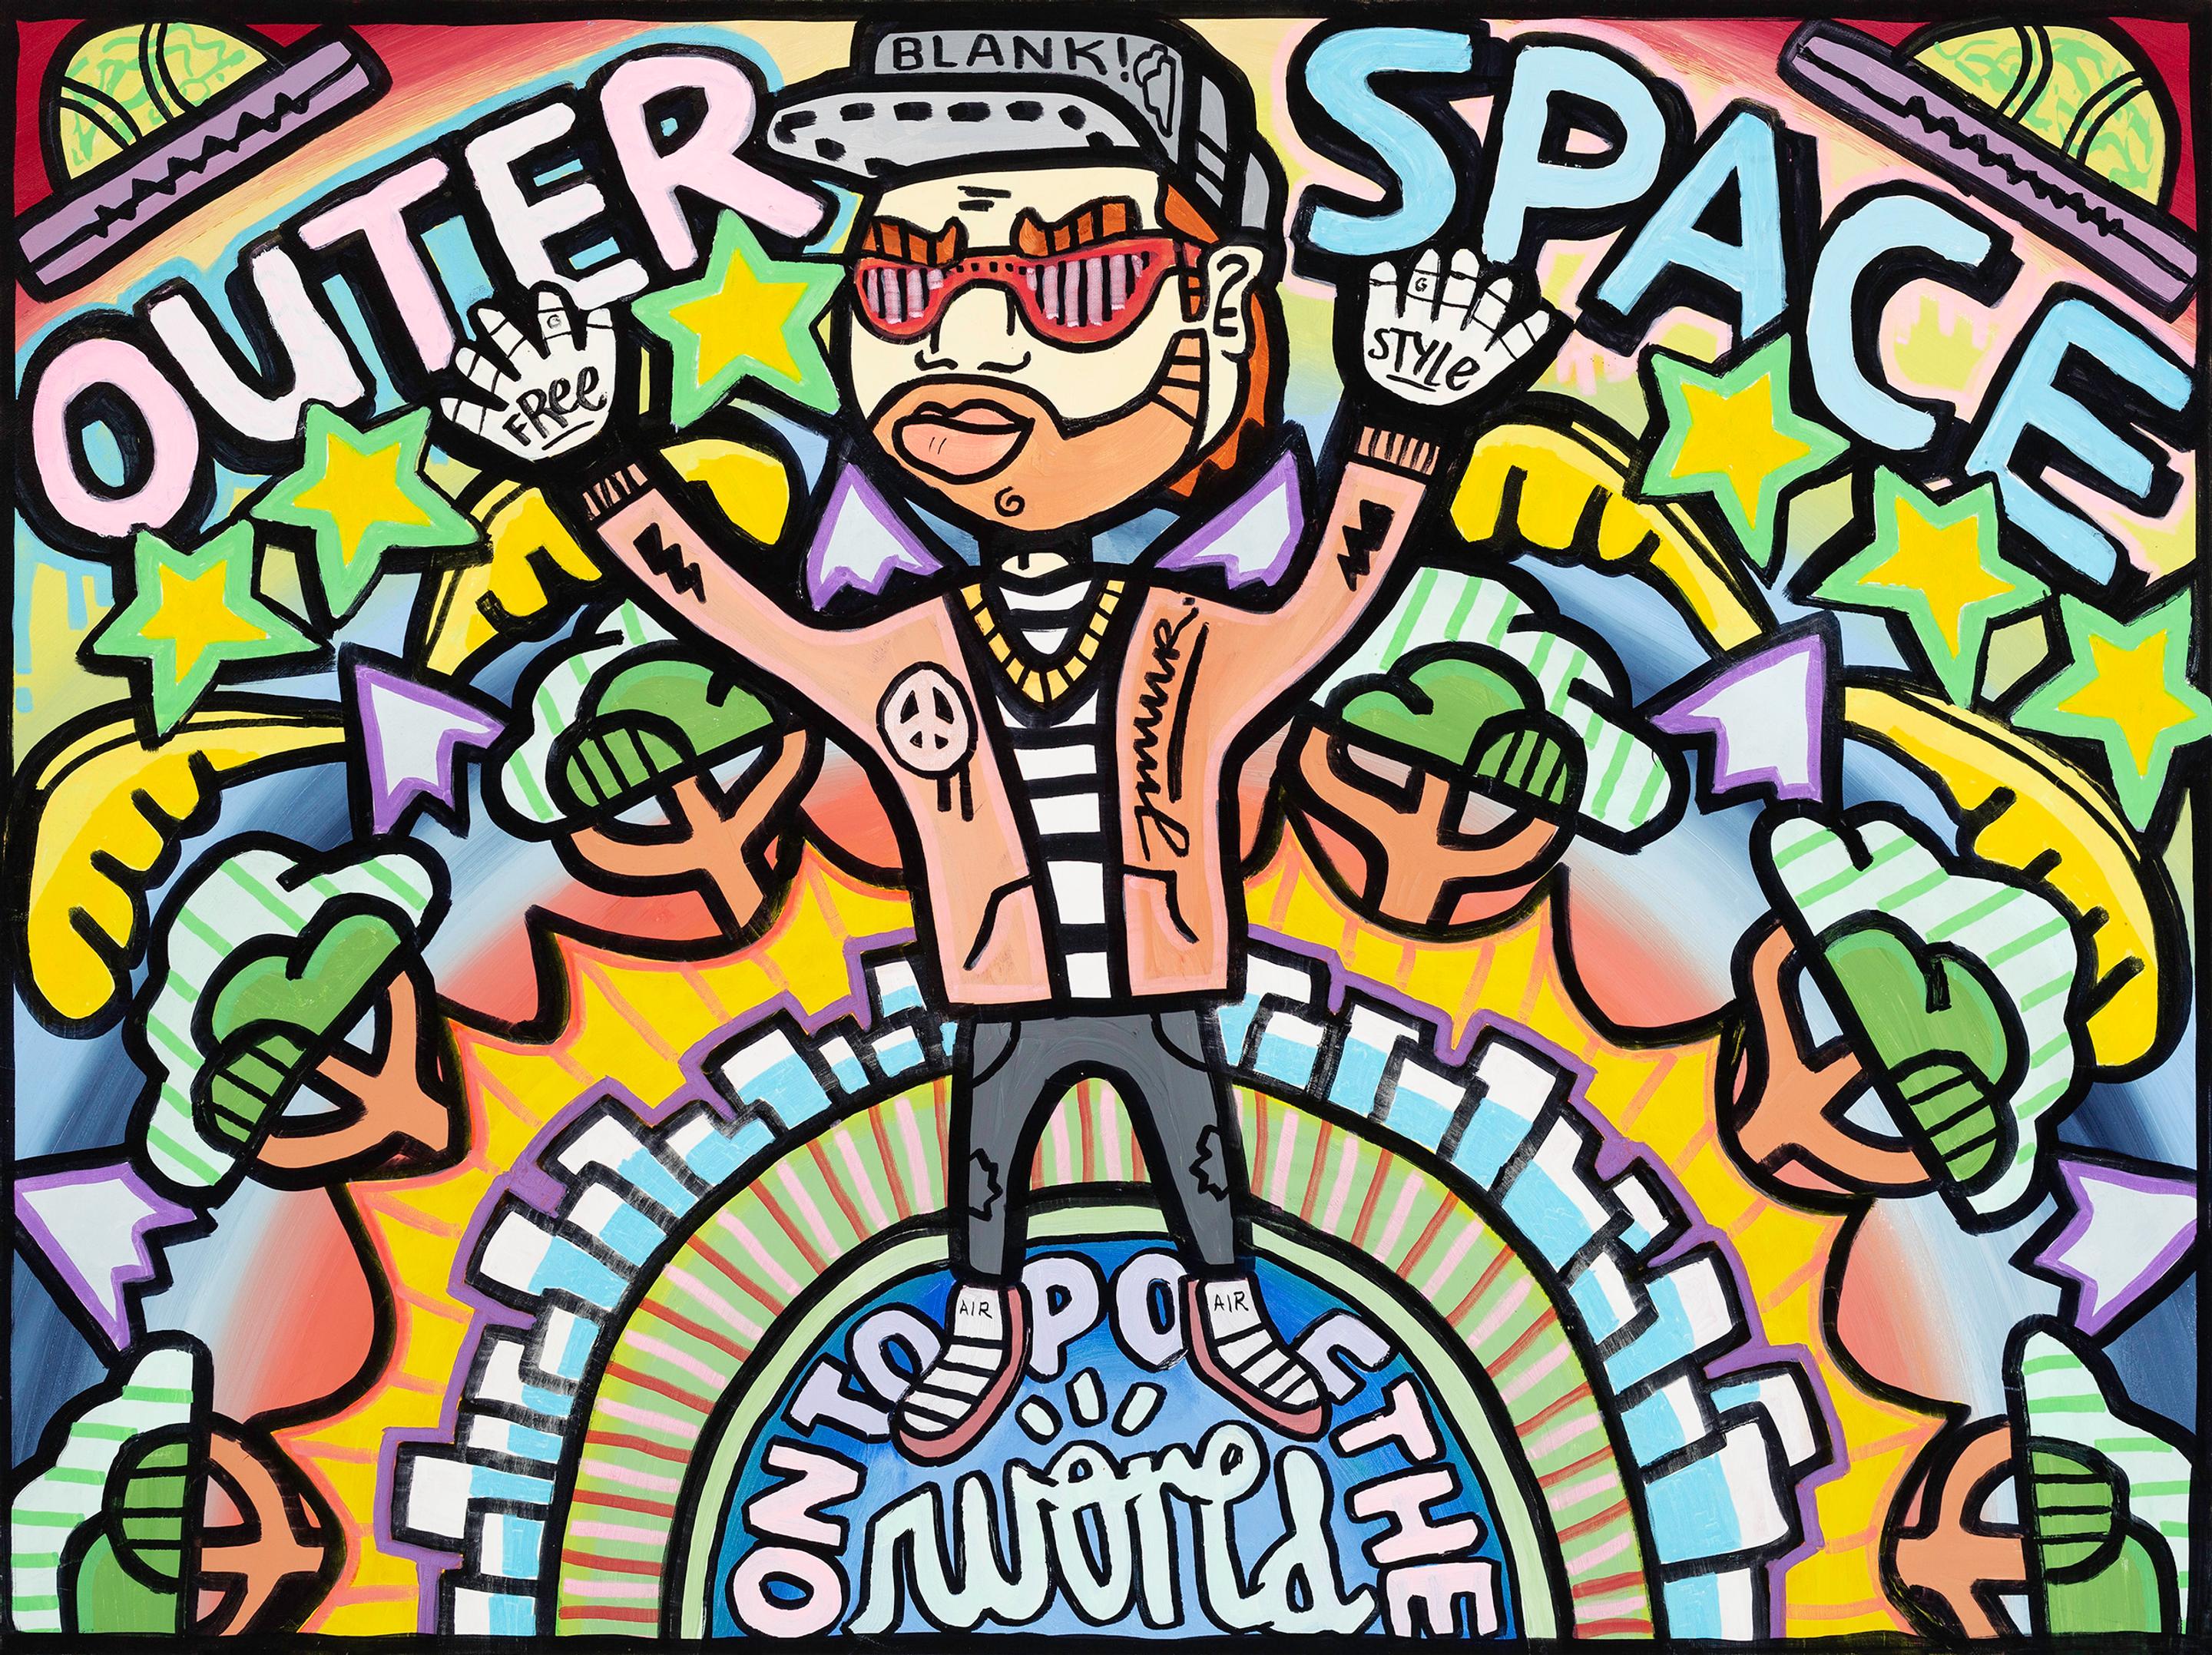 An illustrated figure wearing sunnies and baseball cap raises their hands, touching the words "outer space". They stand on a globe which has the words "on top of the world"